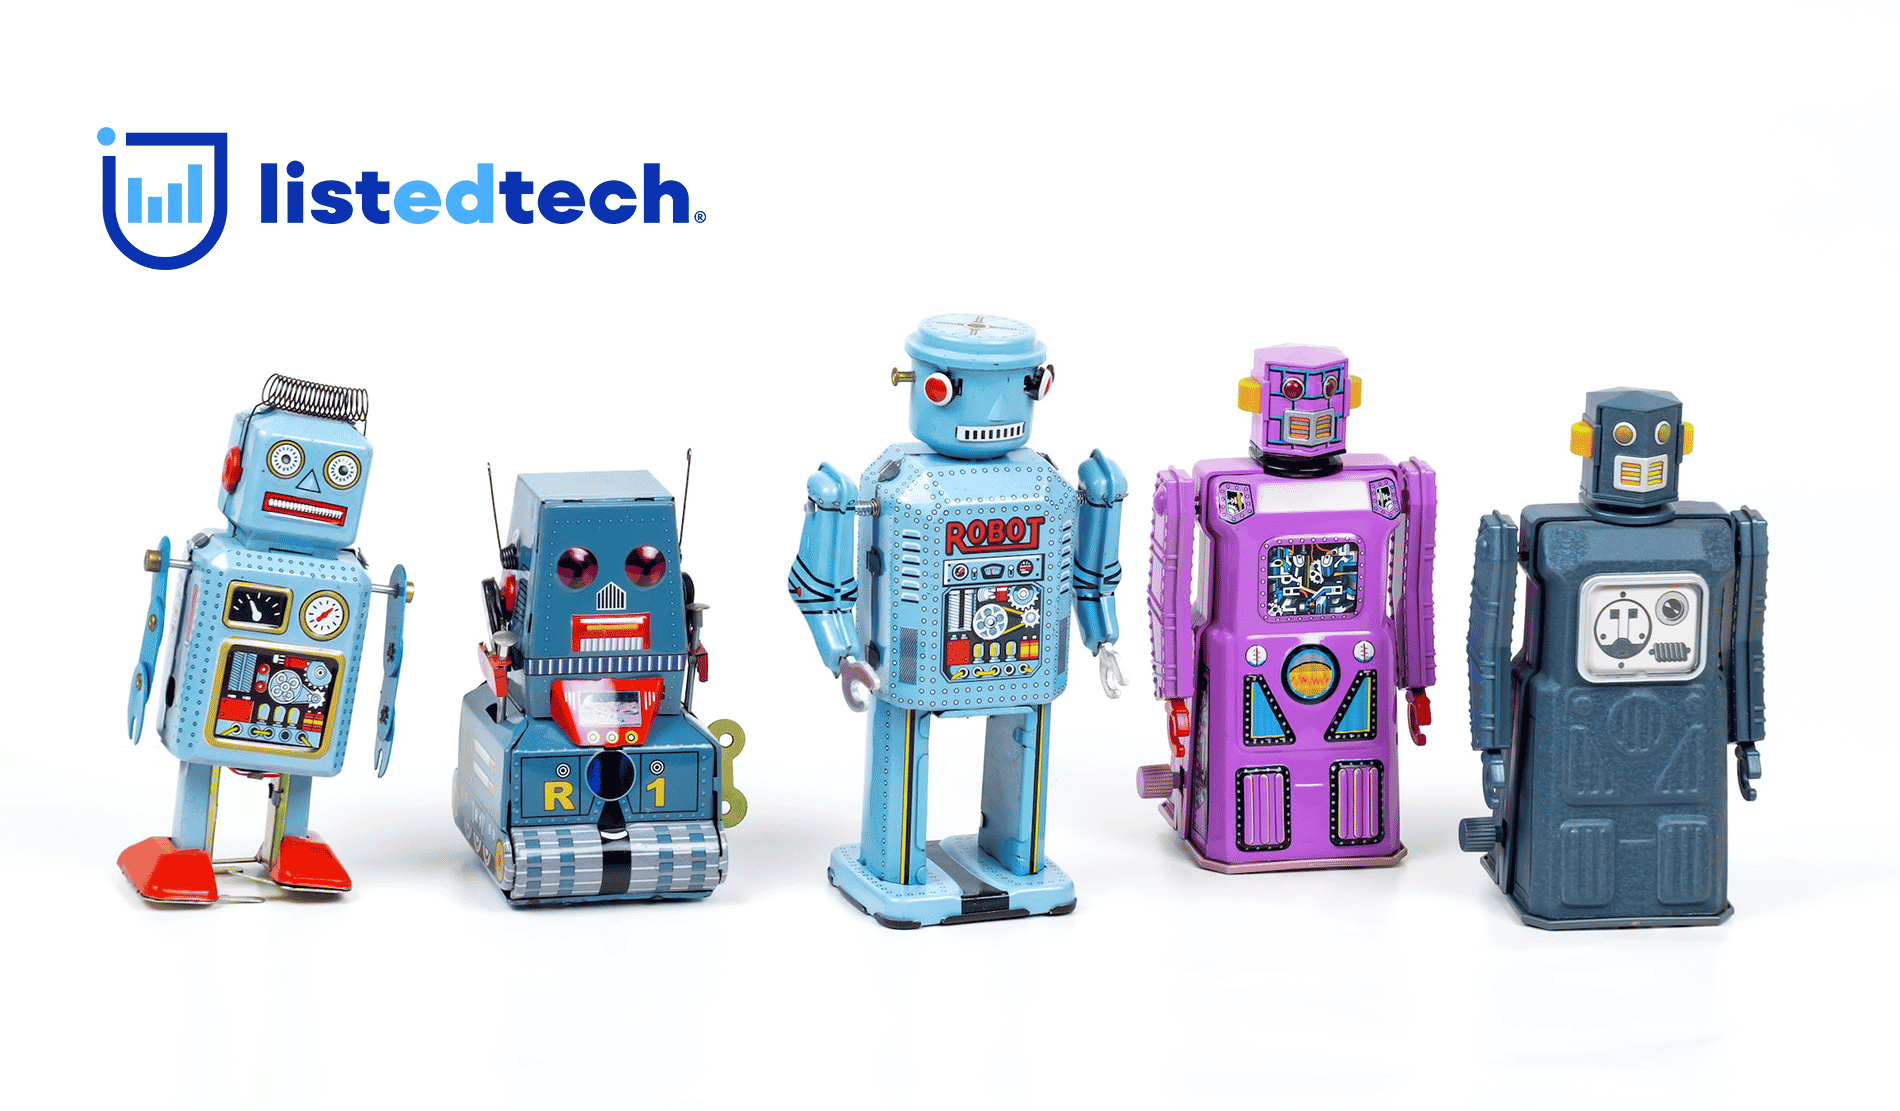 higher ed chatbots as toy robots